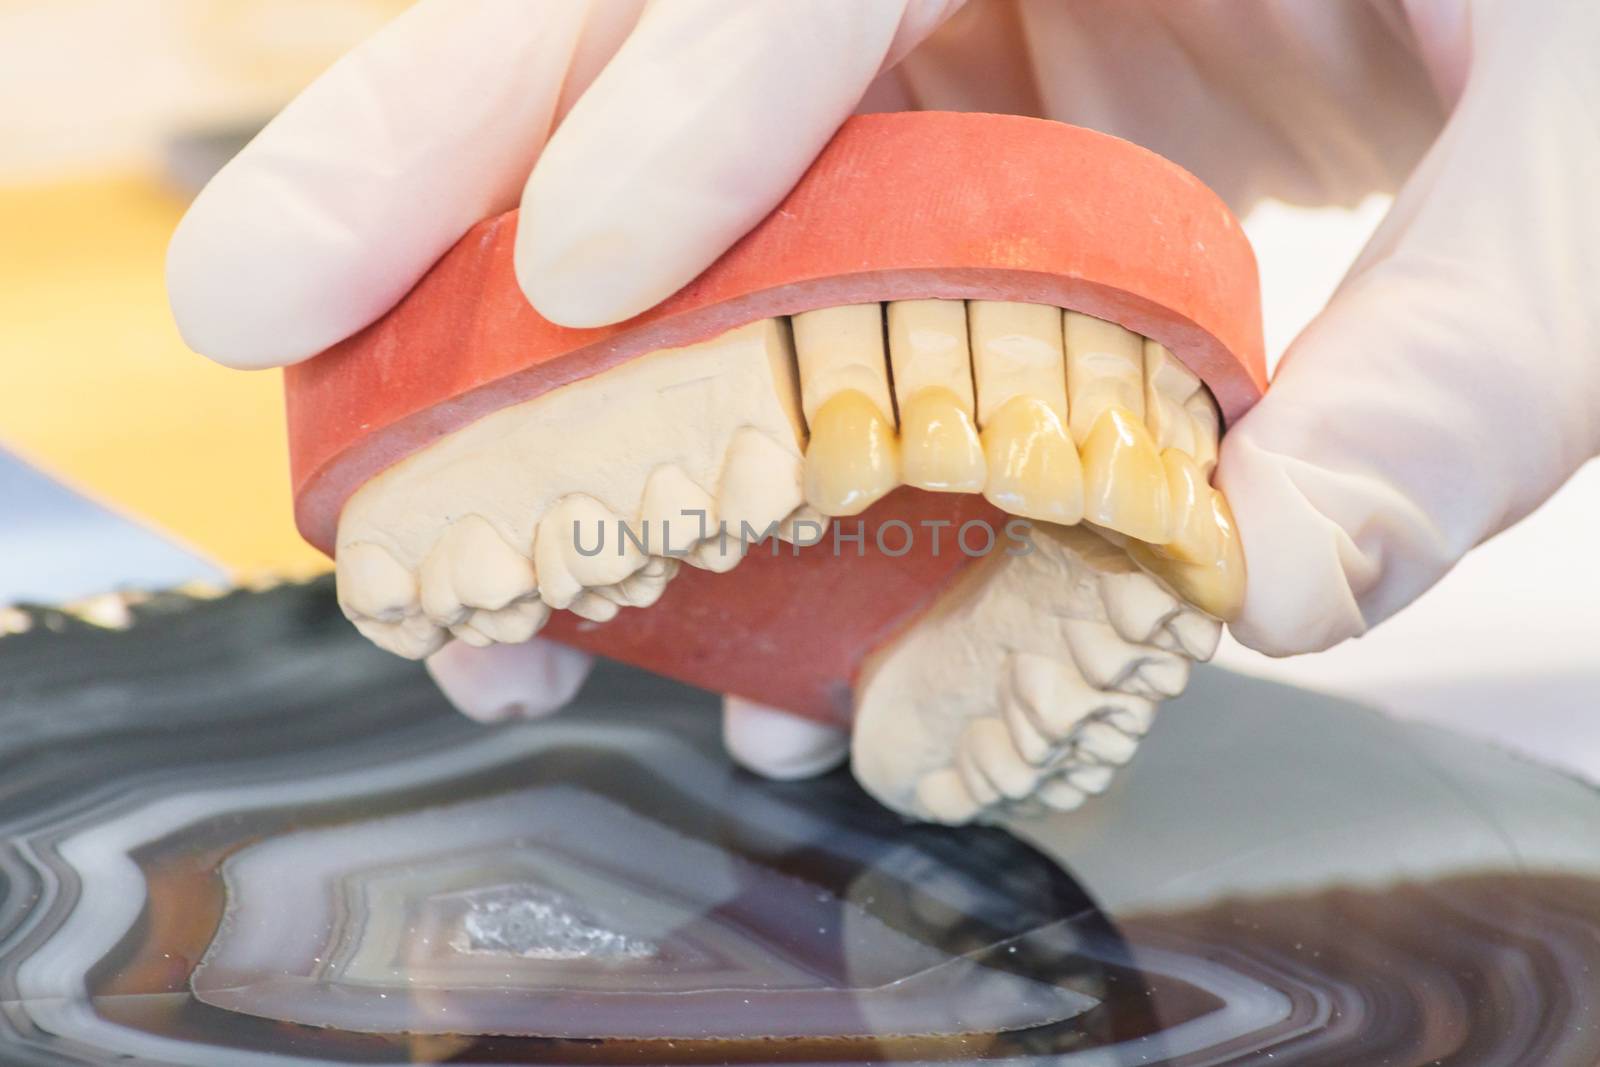 Dentures, prosthesis and oral hygiene. by JFsPic